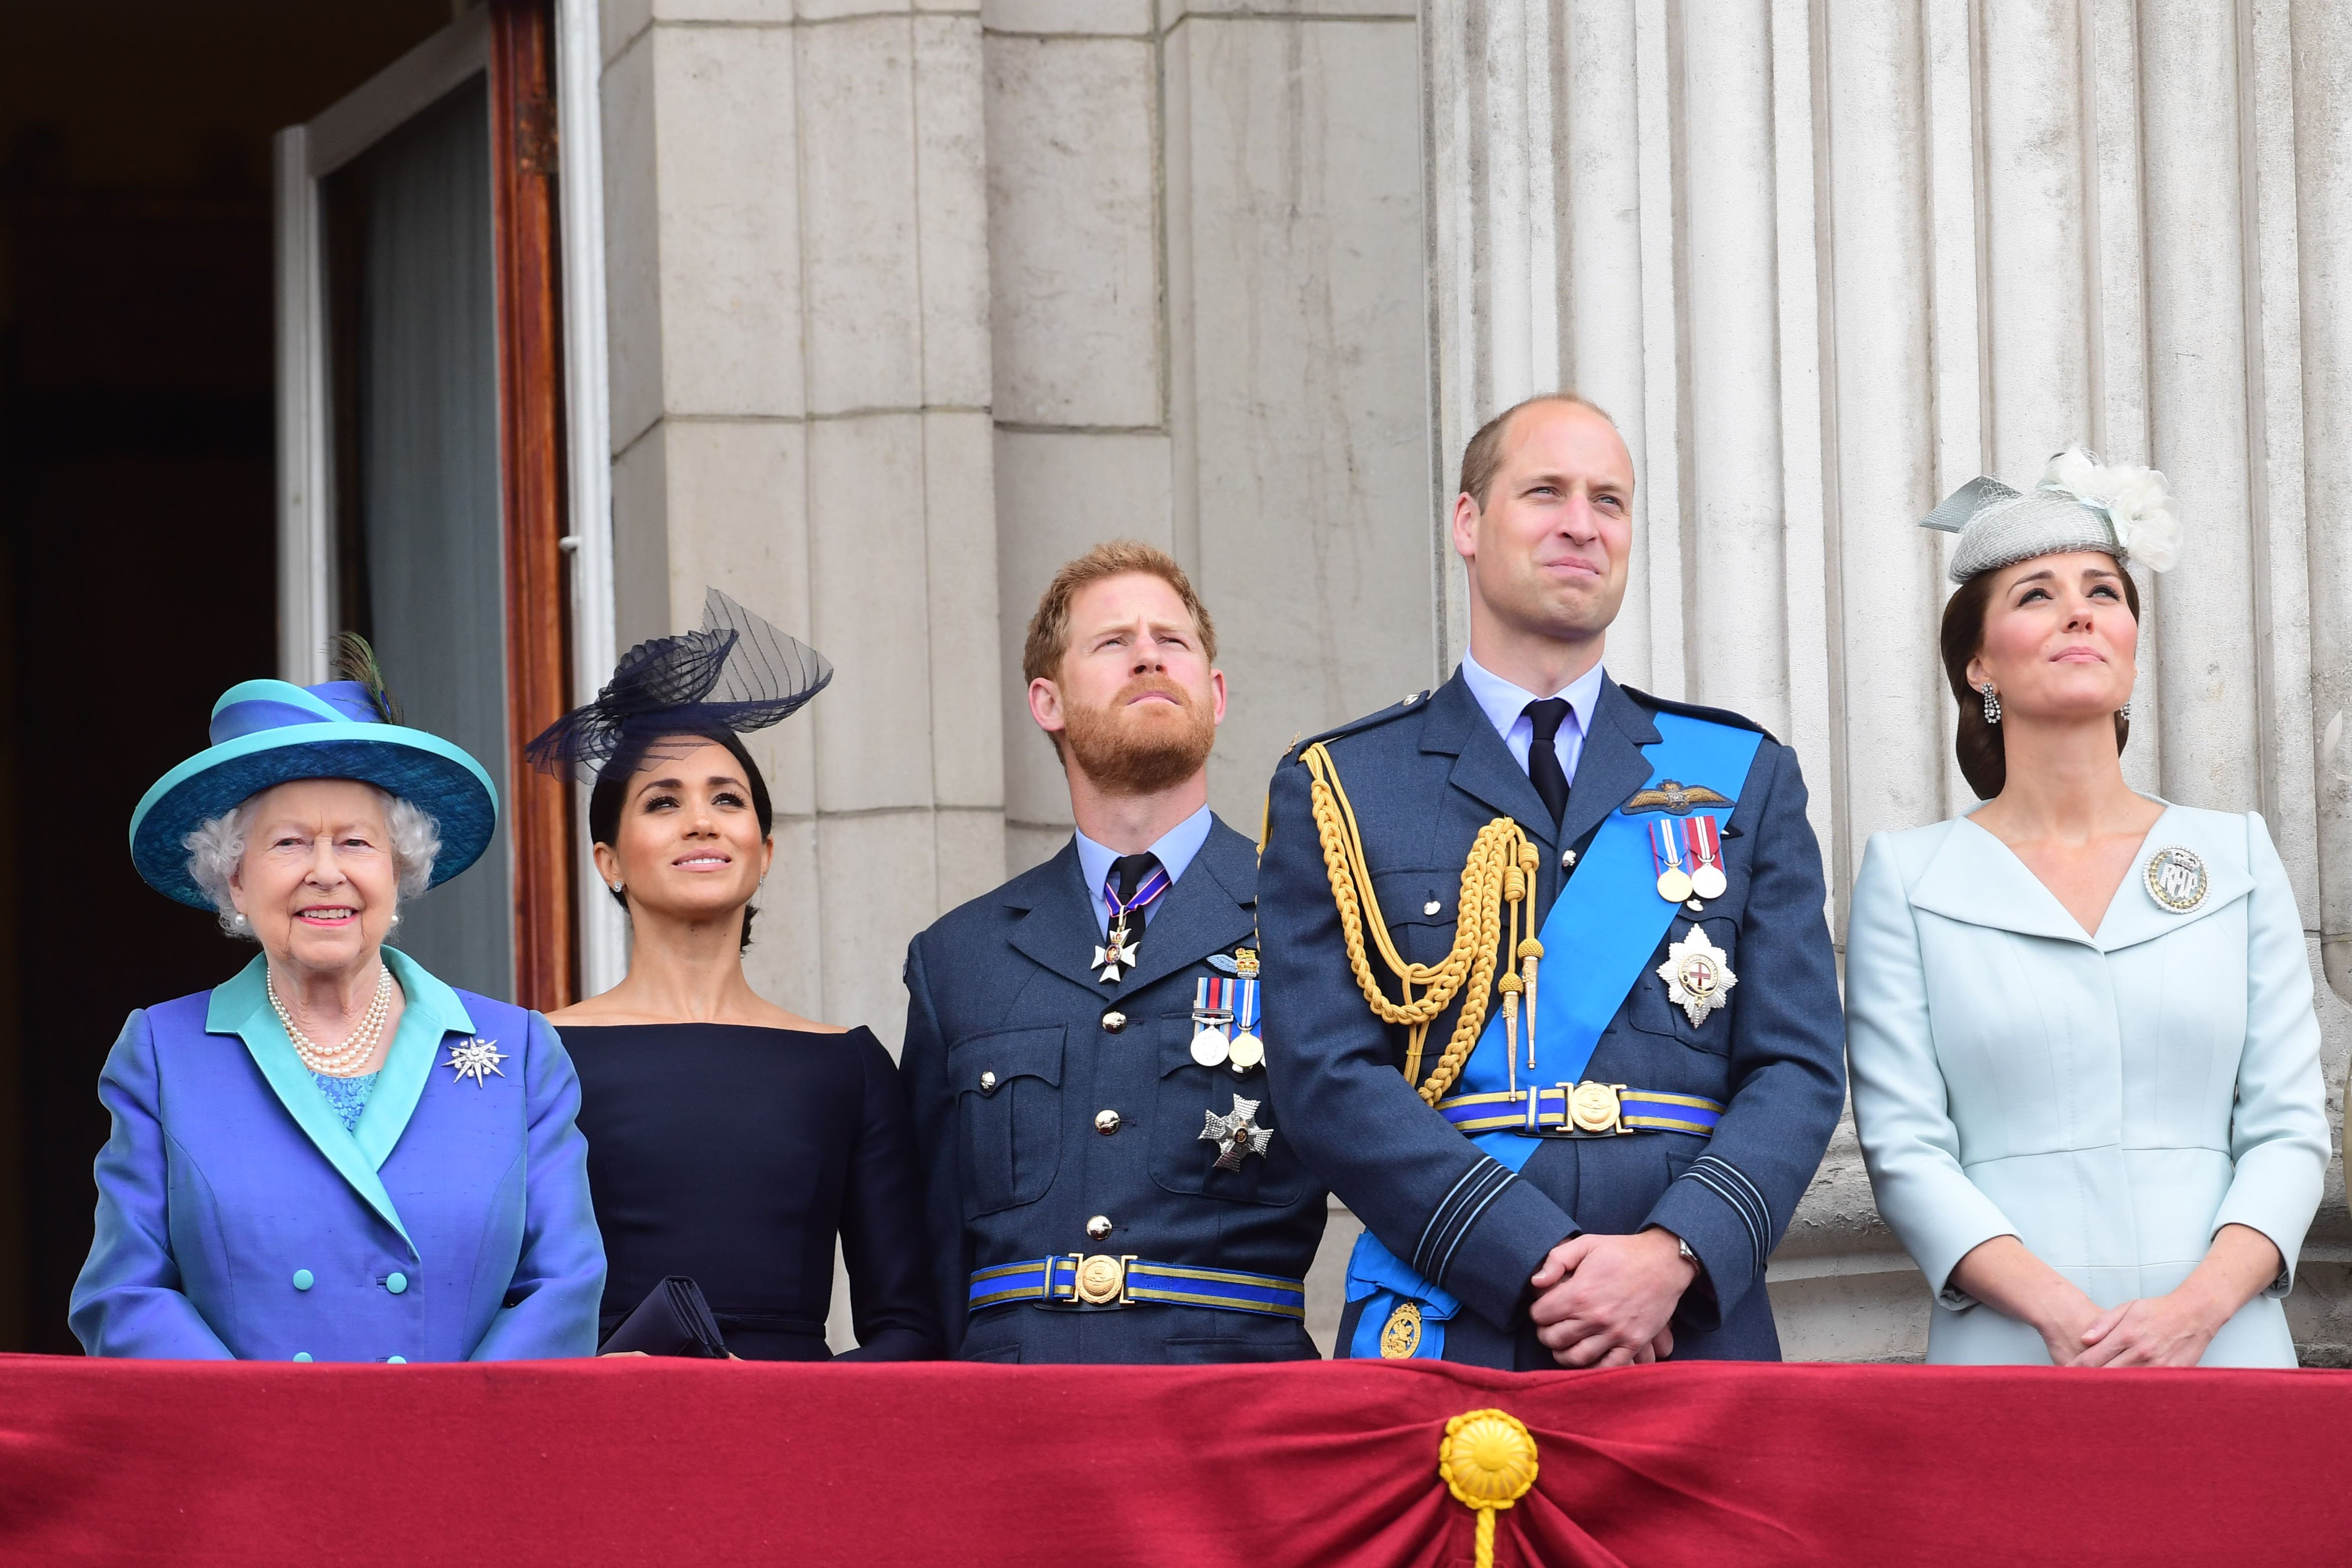 Queen Elizabeth II, Duchess Meghan, Prince Harry, Prince William, and Duchess Kate watch the RAF 100th anniversary flypast from the balcony of Buckingham Palace on July 10, 2018, in London, England. | Source: Getty Images